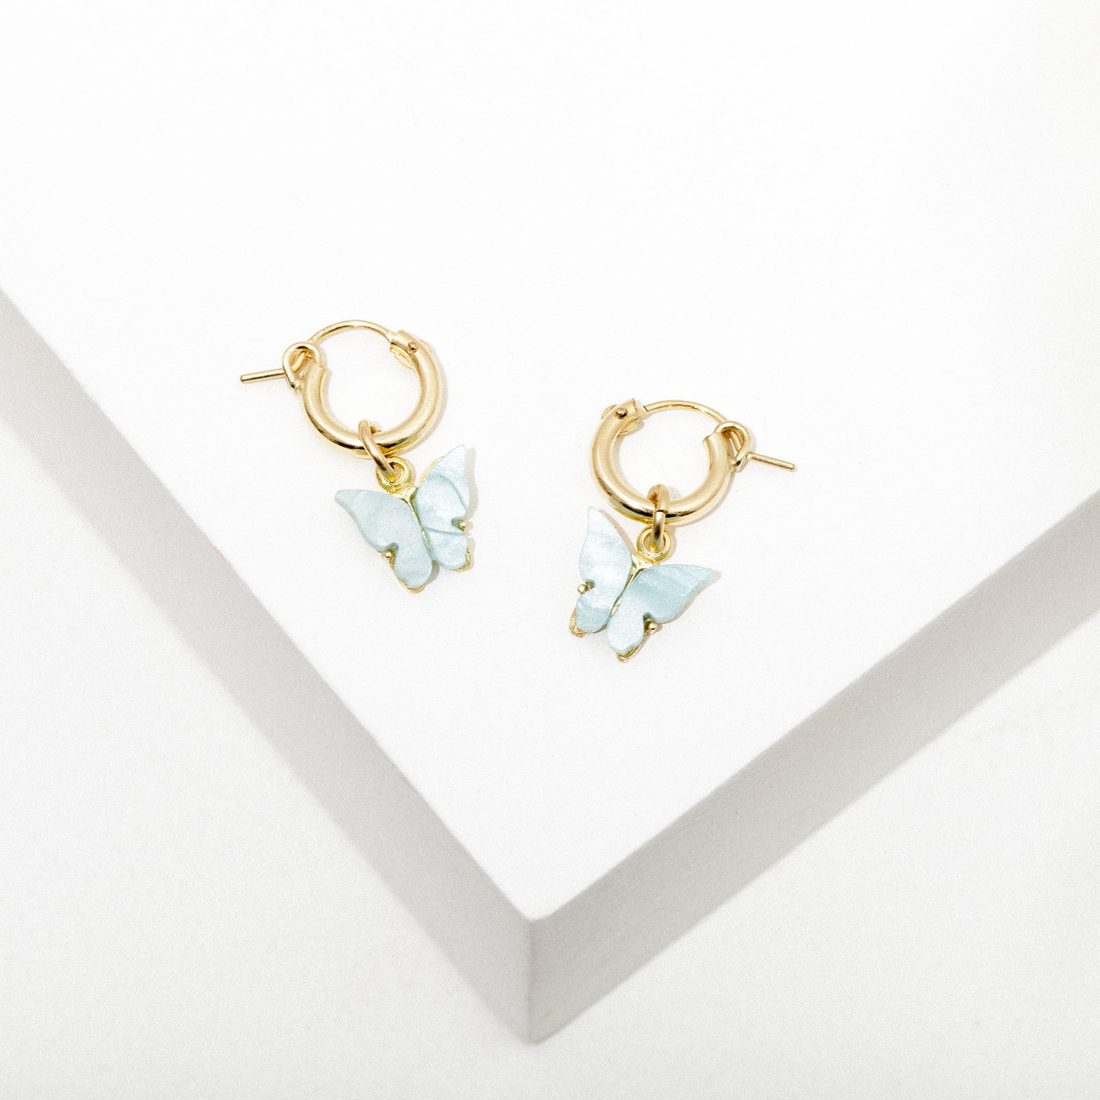 Larissa Loden Jewelry Goodall Earrings in Blue Mother of Pearl ...